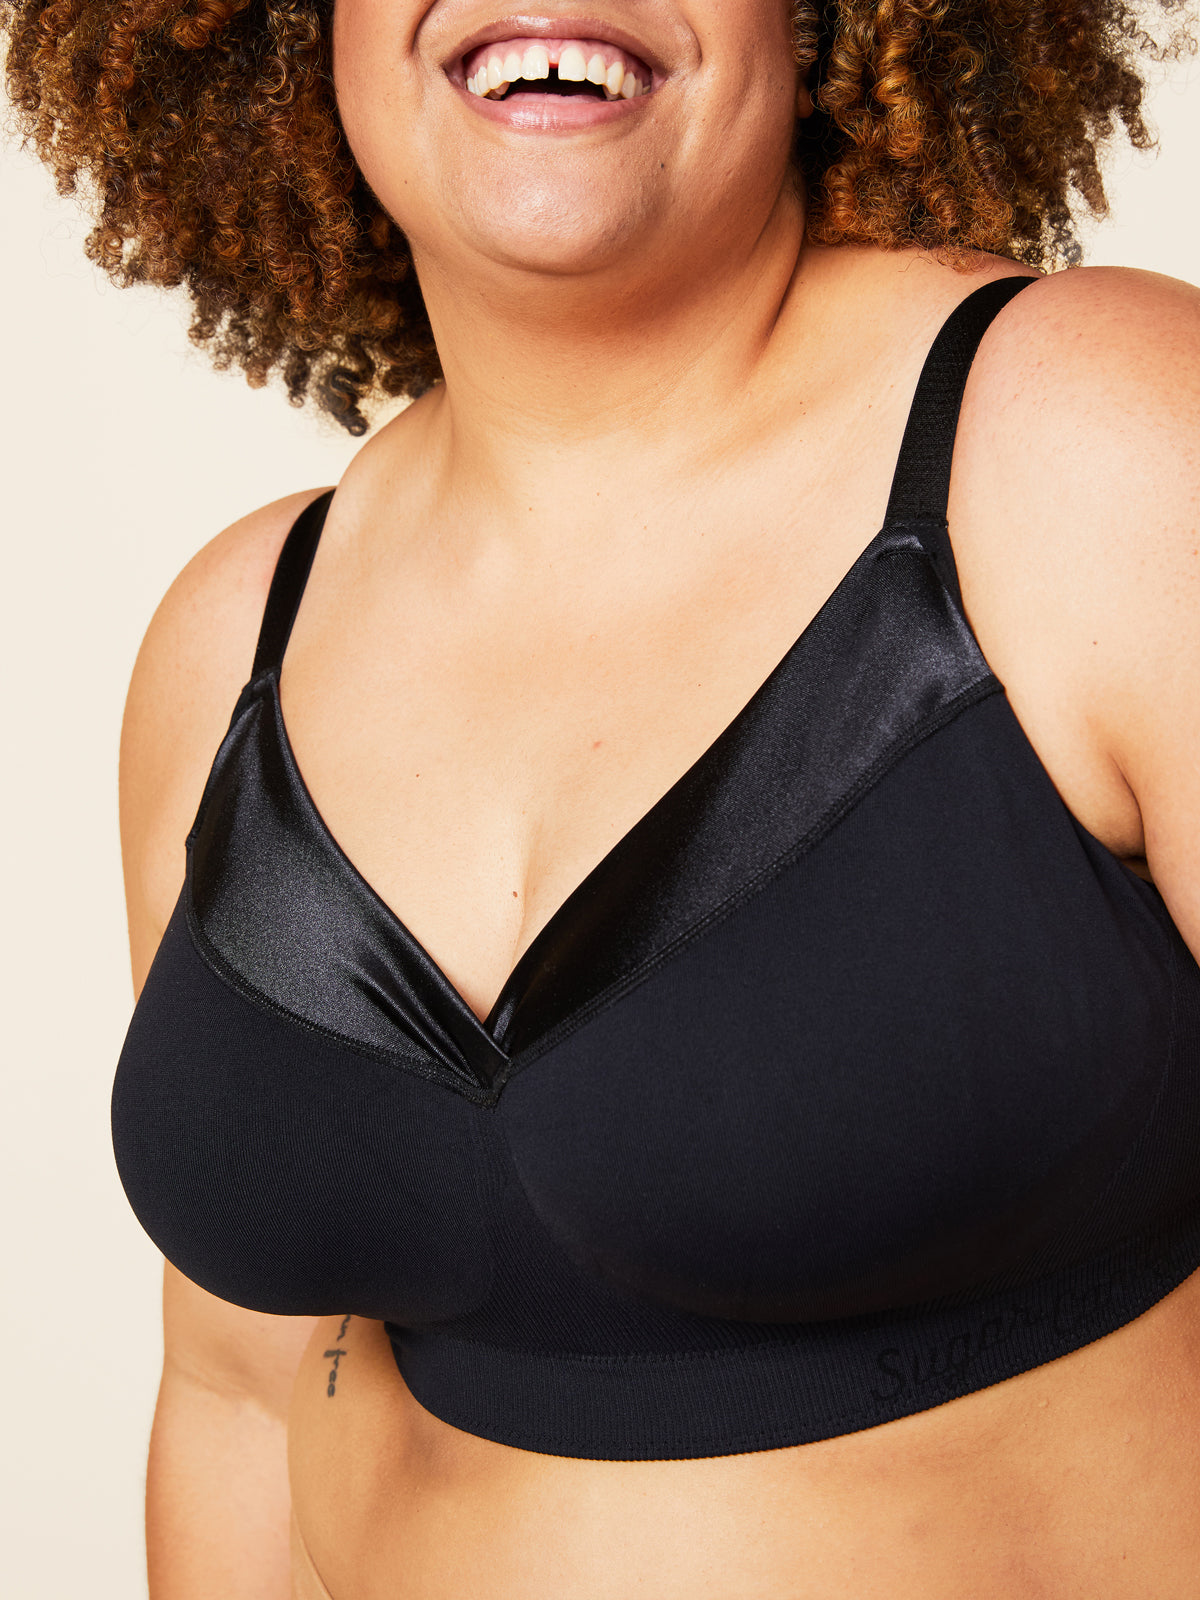 Sugar Candy Bra on X: Everything about this bra is amazing from